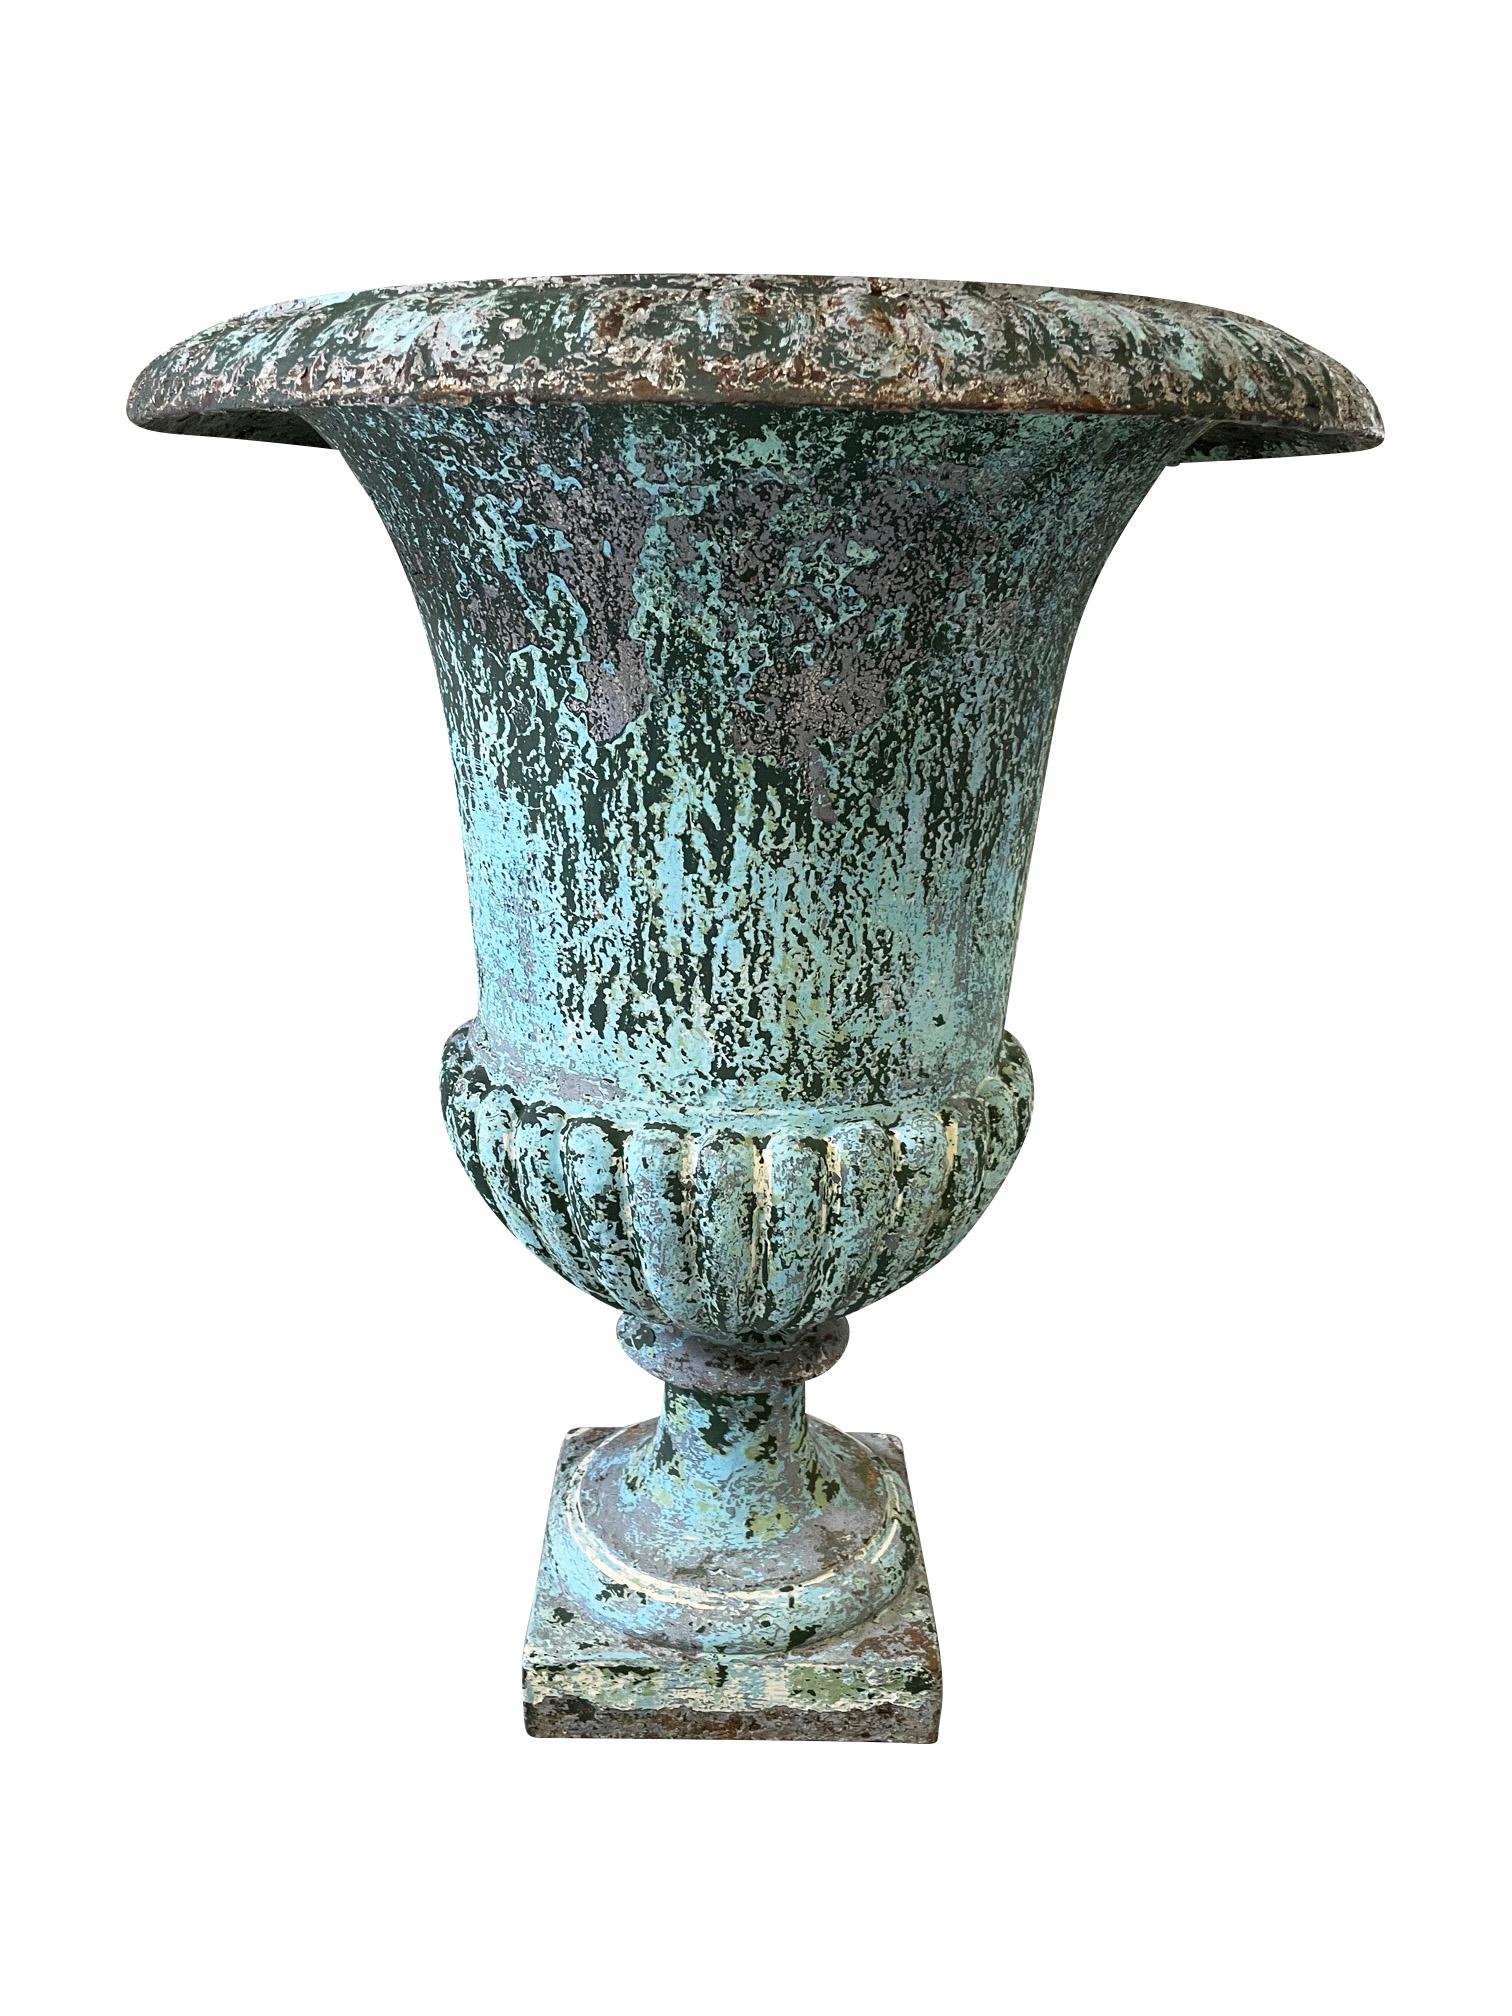 Large 19th Century French Cast Iron Urn For Sale 3